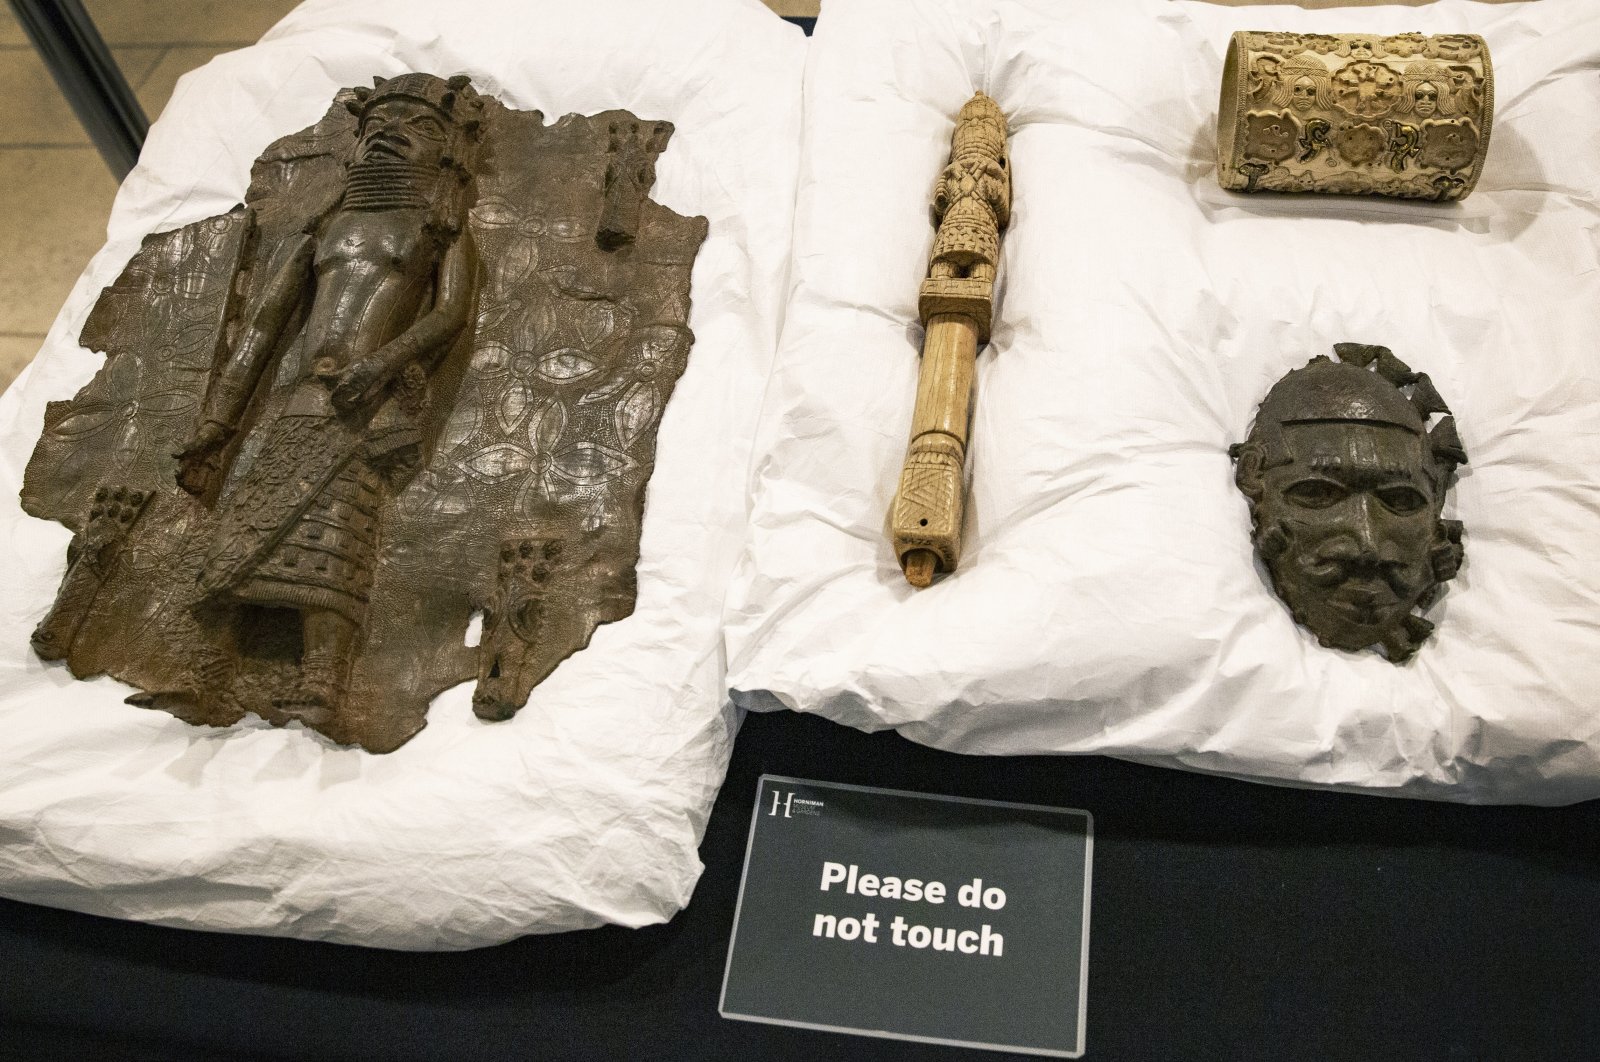 Artifacts on show during a ceremony at the Horniman Museum where the museum began the process of returning looted Benin bronzes to Nigeria, London, U.K, Nov. 28, 2022.